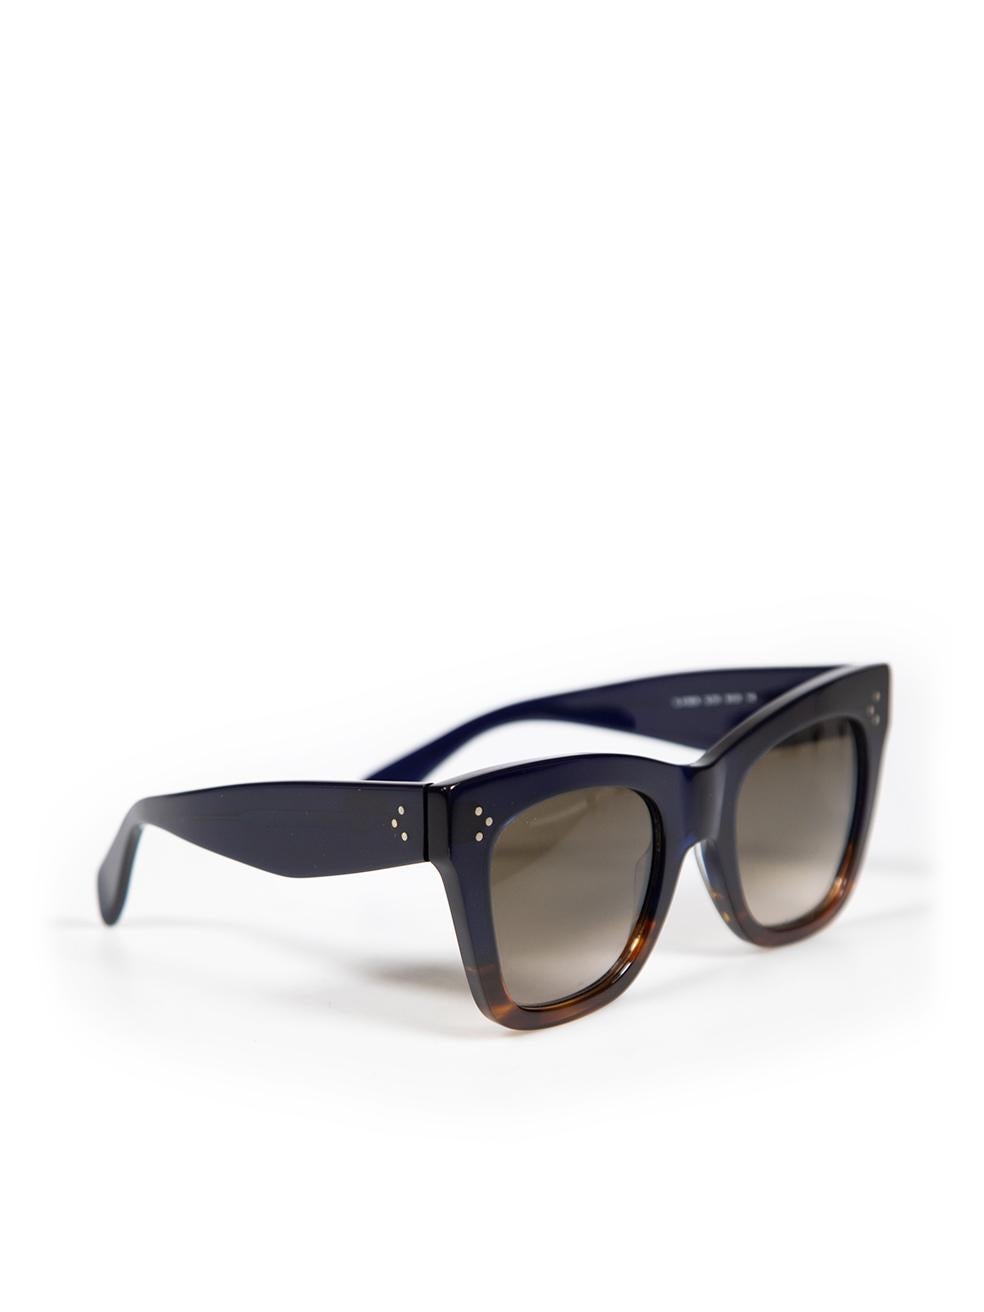 CONDITION is Very good. Hardly any visible wear to sunglasses is evident on this used Céline designer resale item. This item comes with the original box.
 
 
 
 Details
 
 
 Blue
 
 Acetate
 
 Sunglasses
 
 Cat-eye
 
 Tortoiseshell detail
 
